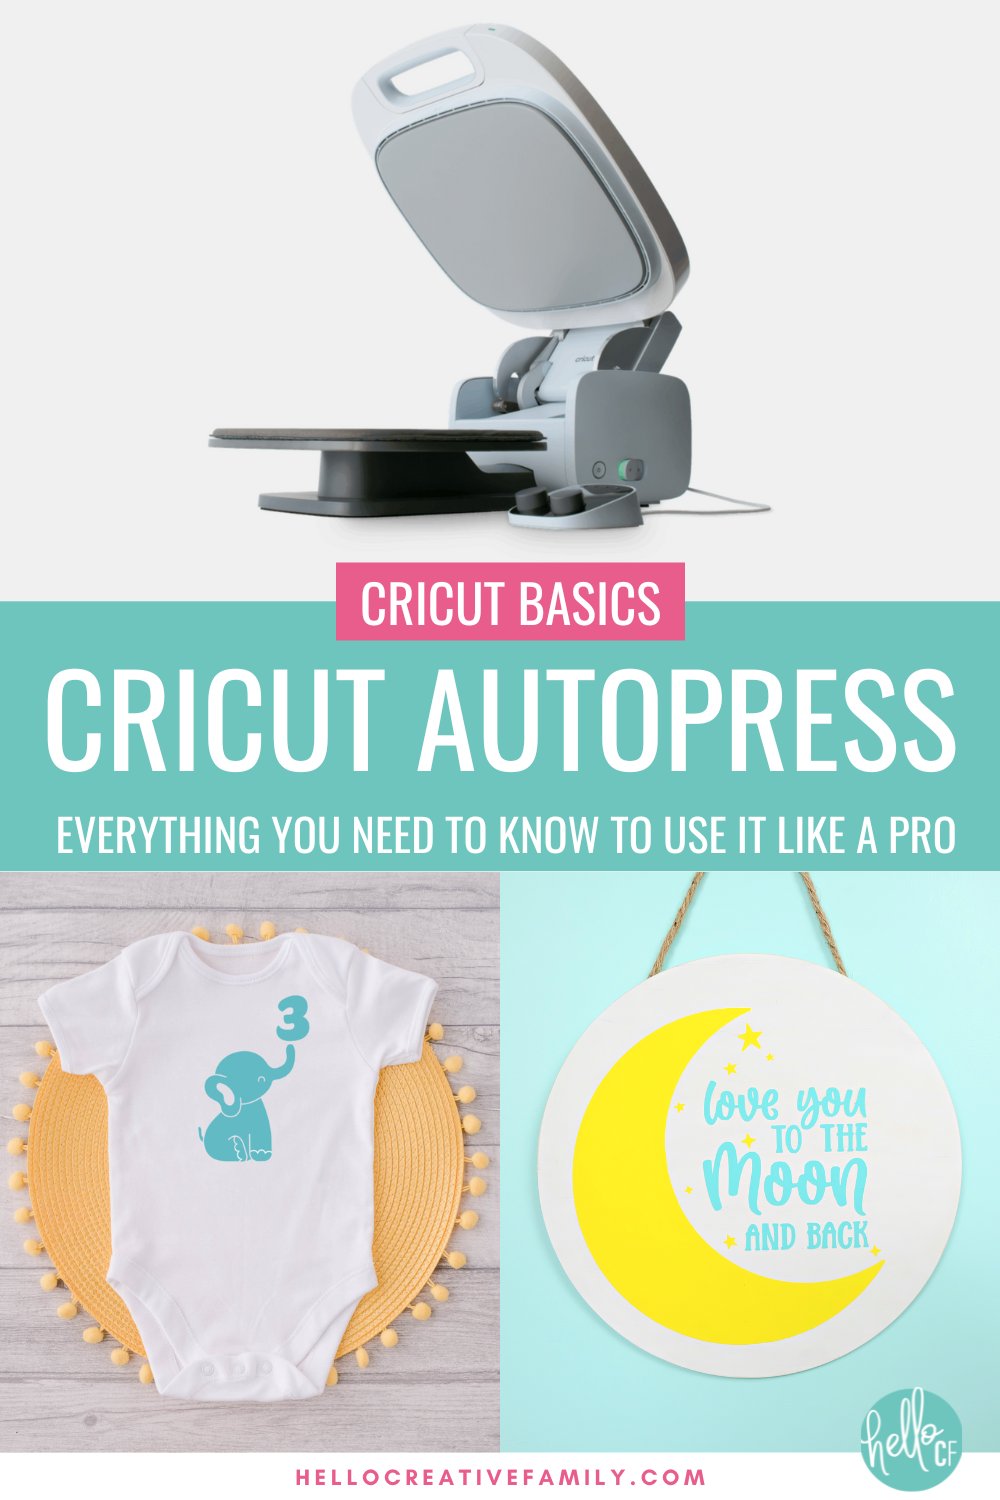 Learn everything you need to know about the Cricut Autopress! This amazing heat press can be used to apply HTV, Infusible Ink and sublimation products to a variety of blanks including shirts, hoodies, baby onesies, aprons, tote bags, wood signs and more! We cover everything you need to know about this amazing machine, plus walk you through step by step how to use it to make Infusible Ink milestone onesies and a wood sign to decorate a nursery!